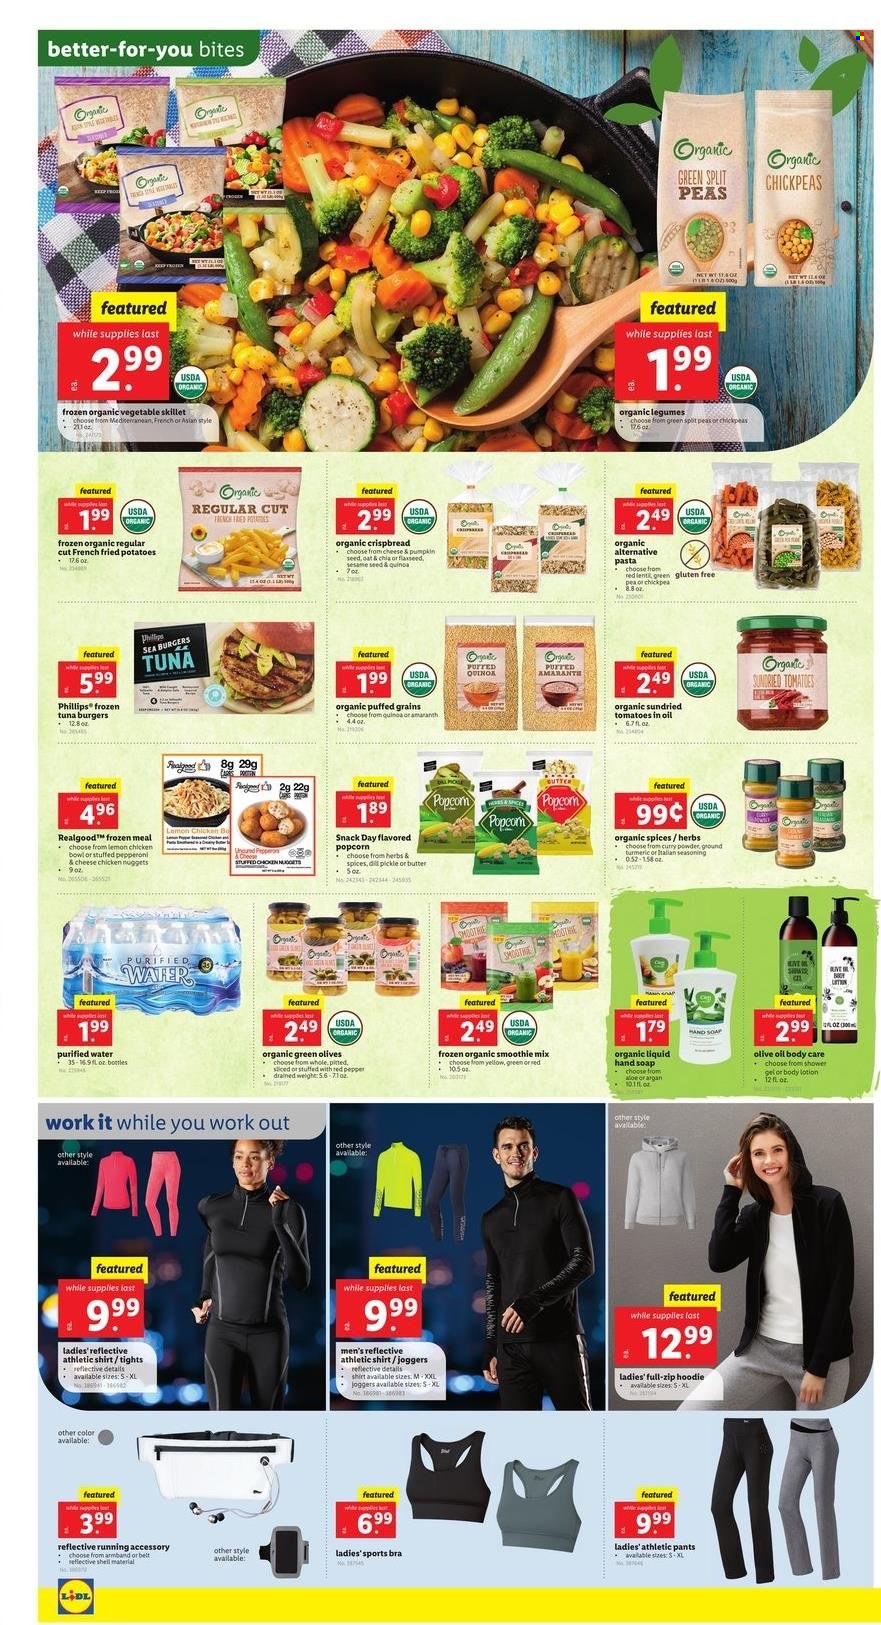 thumbnail - Lidl Flyer - 01/05/2022 - 01/11/2022 - Sales products - crispbread, tomatoes, potatoes, peas, tuna, nuggets, hamburger, pasta, chicken nuggets, pepperoni, cheese, butter, split peas, snack, dill pickle, popcorn, oats, dried tomatoes, olives, quinoa, chickpeas, dill, turmeric, spice, curry powder, smoothie, purified water, pants, hand soap, soap, body lotion, hoodie, shirt, joggers, tights, bra, Shell. Page 2.